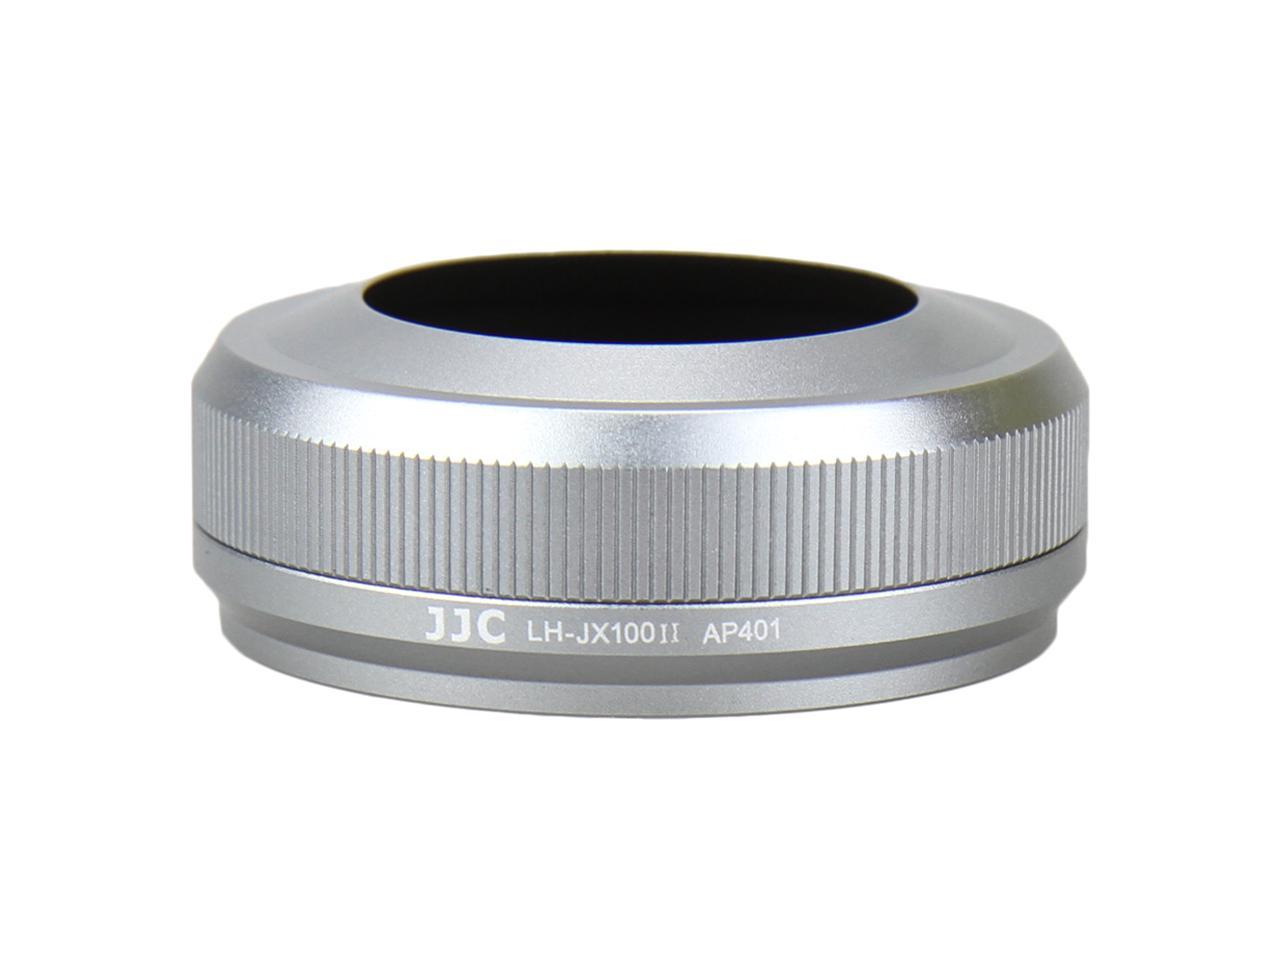 JJC LH-JX100II SILVER Upgrade Lens Hood Shade Adapter Ring for Fujifilm FinePix X100 X100S Replaces AR-X100 Silver